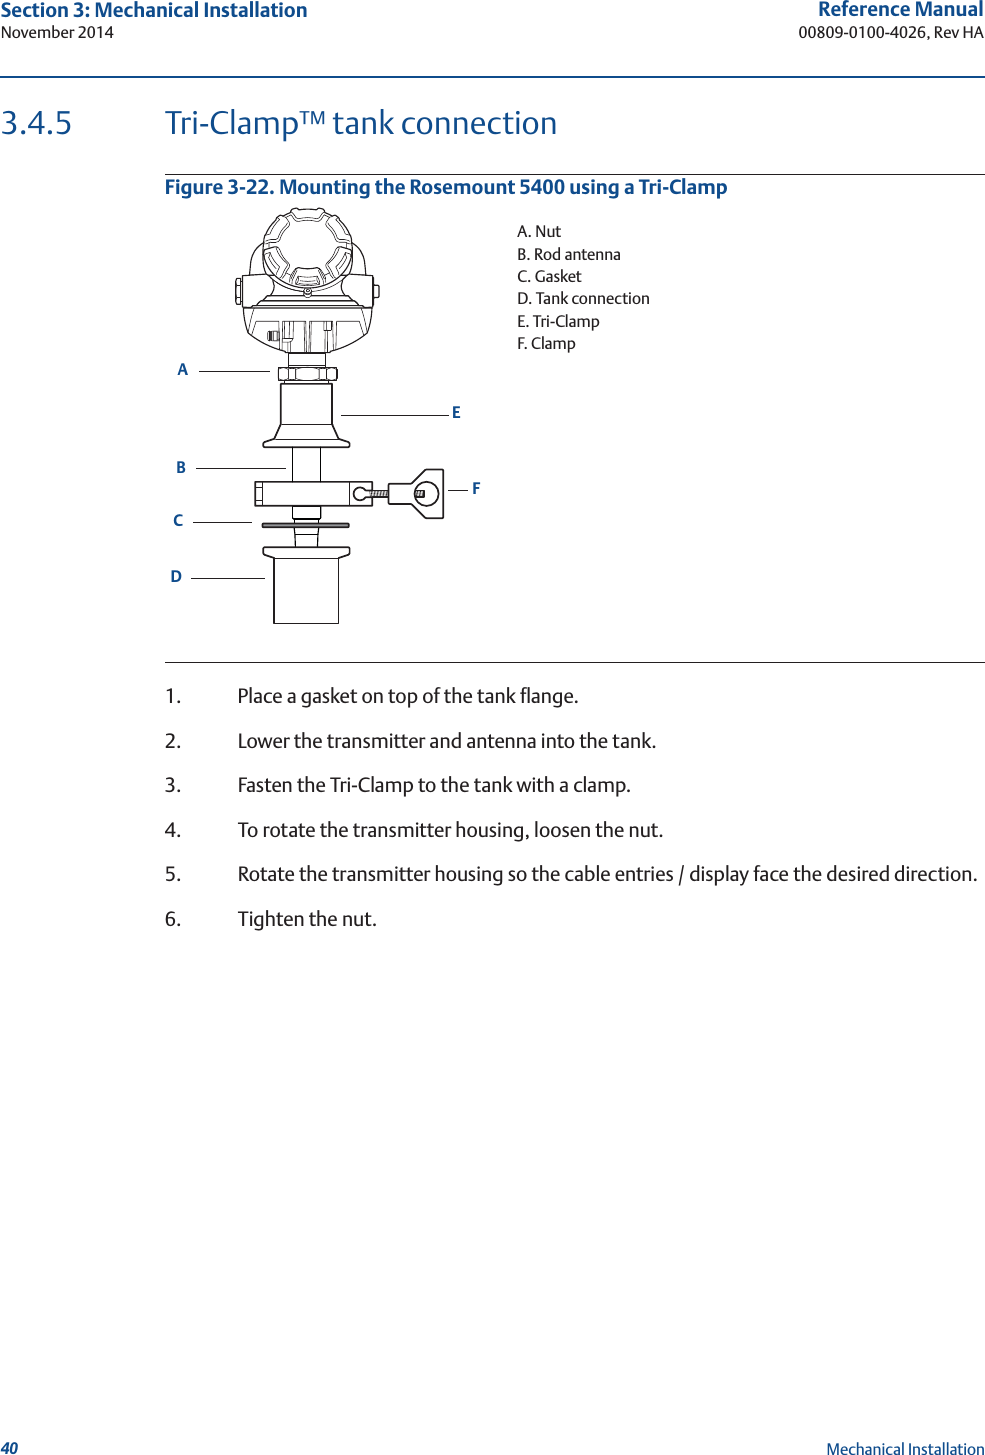 40Reference Manual00809-0100-4026, Rev HASection 3: Mechanical InstallationNovember 2014Mechanical Installation3.4.5 Tri-Clamp™ tank connectionFigure 3-22. Mounting the Rosemount 5400 using a Tri-Clamp1. Place a gasket on top of the tank flange.2. Lower the transmitter and antenna into the tank.3. Fasten the Tri-Clamp to the tank with a clamp.4. To rotate the transmitter housing, loosen the nut.5. Rotate the transmitter housing so the cable entries / display face the desired direction.6. Tighten the nut.CBADEFA. NutB. Rod antennaC. GasketD. Tank connectionE. Tri-ClampF. Clamp